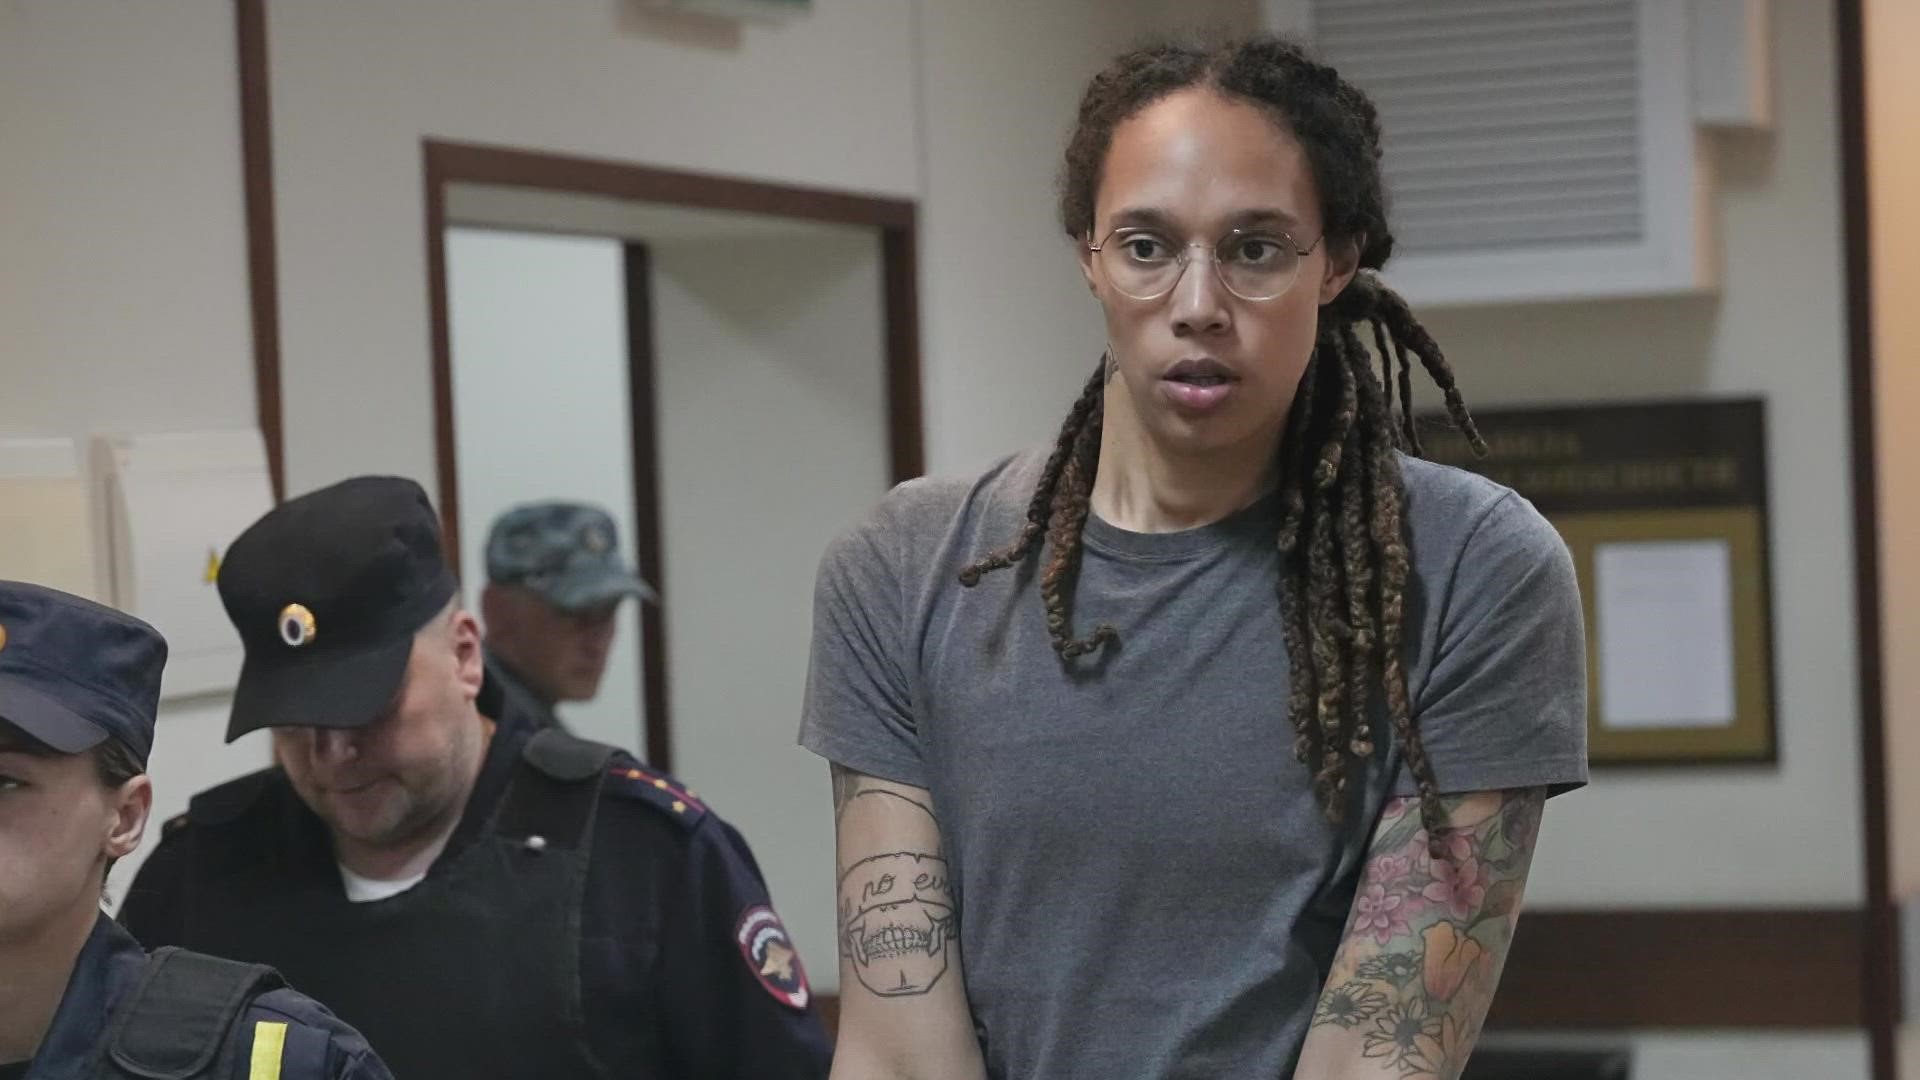 Brittney Griner's lawyers are appealing her sentence, while Russian officials say they're open to a prisoner swap.